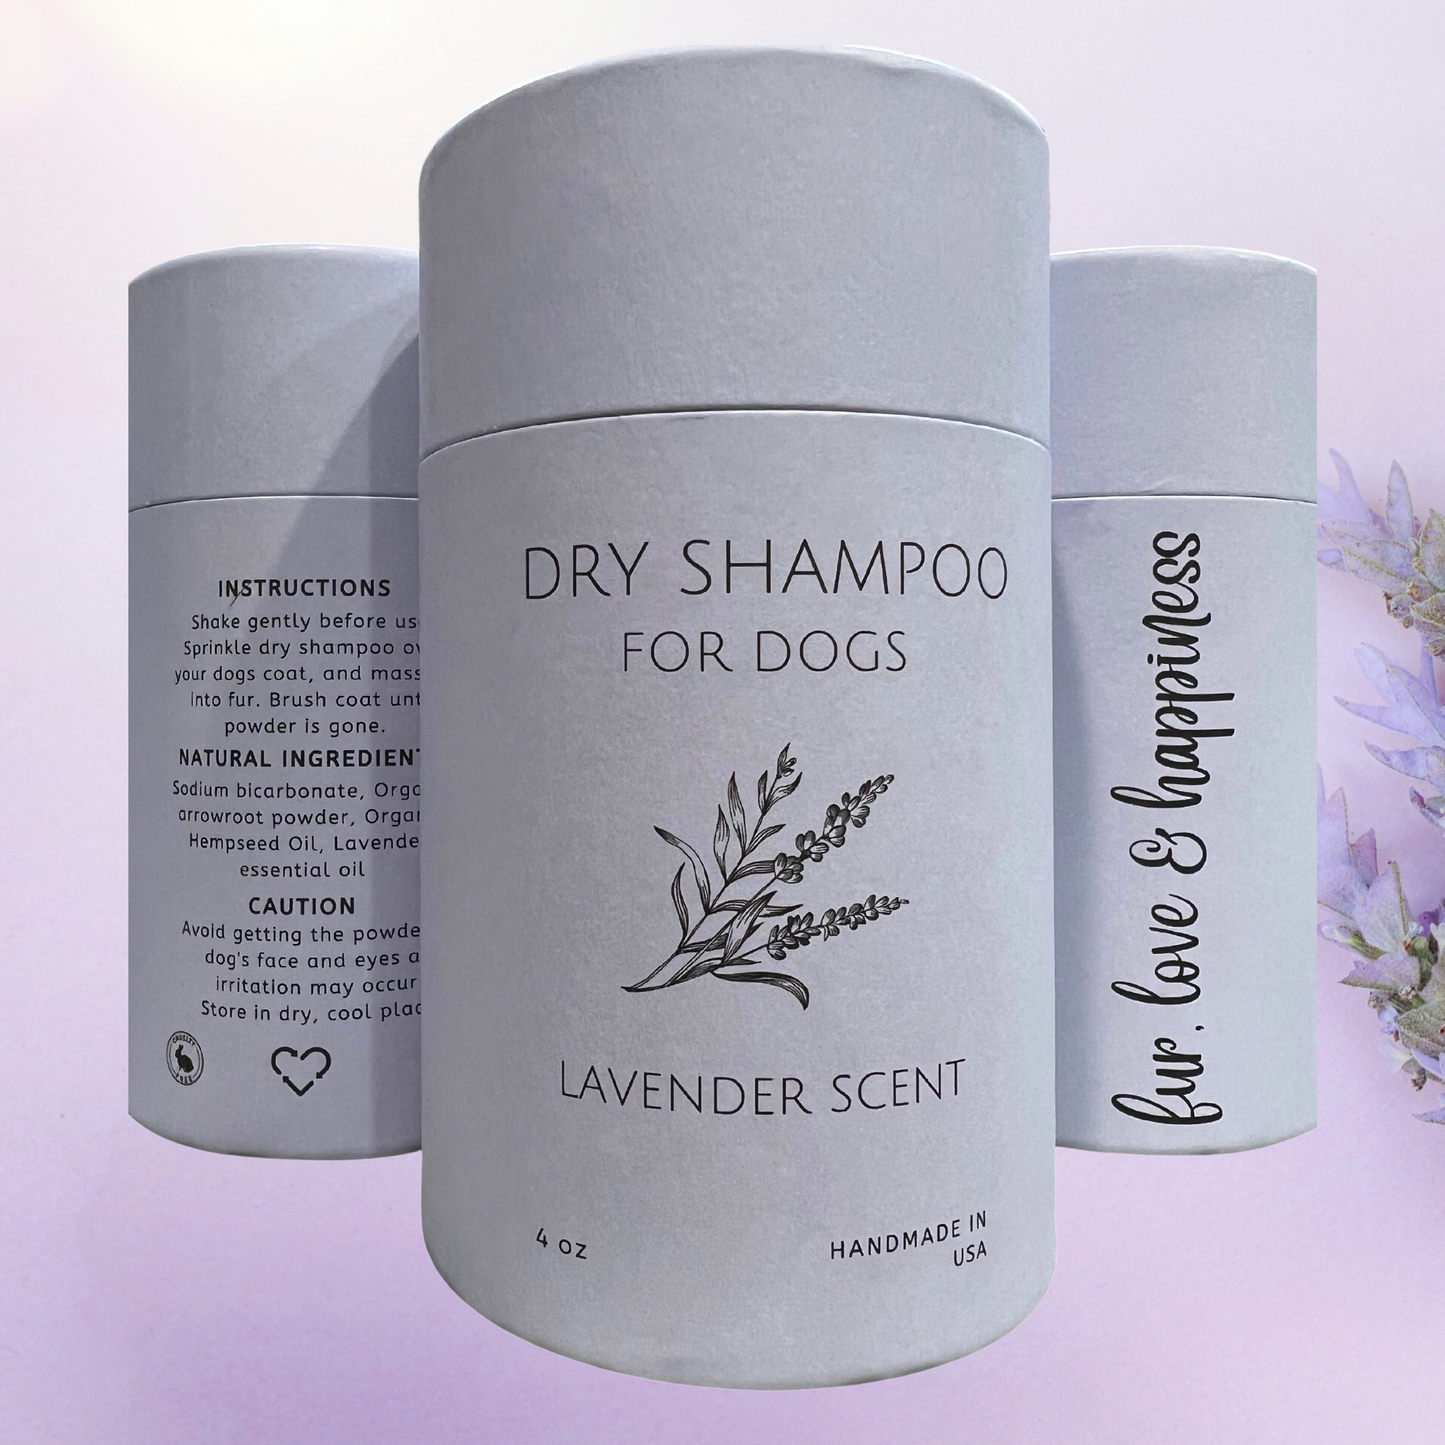 Purple dry shampoo powder container, lavender scent with lavender plant